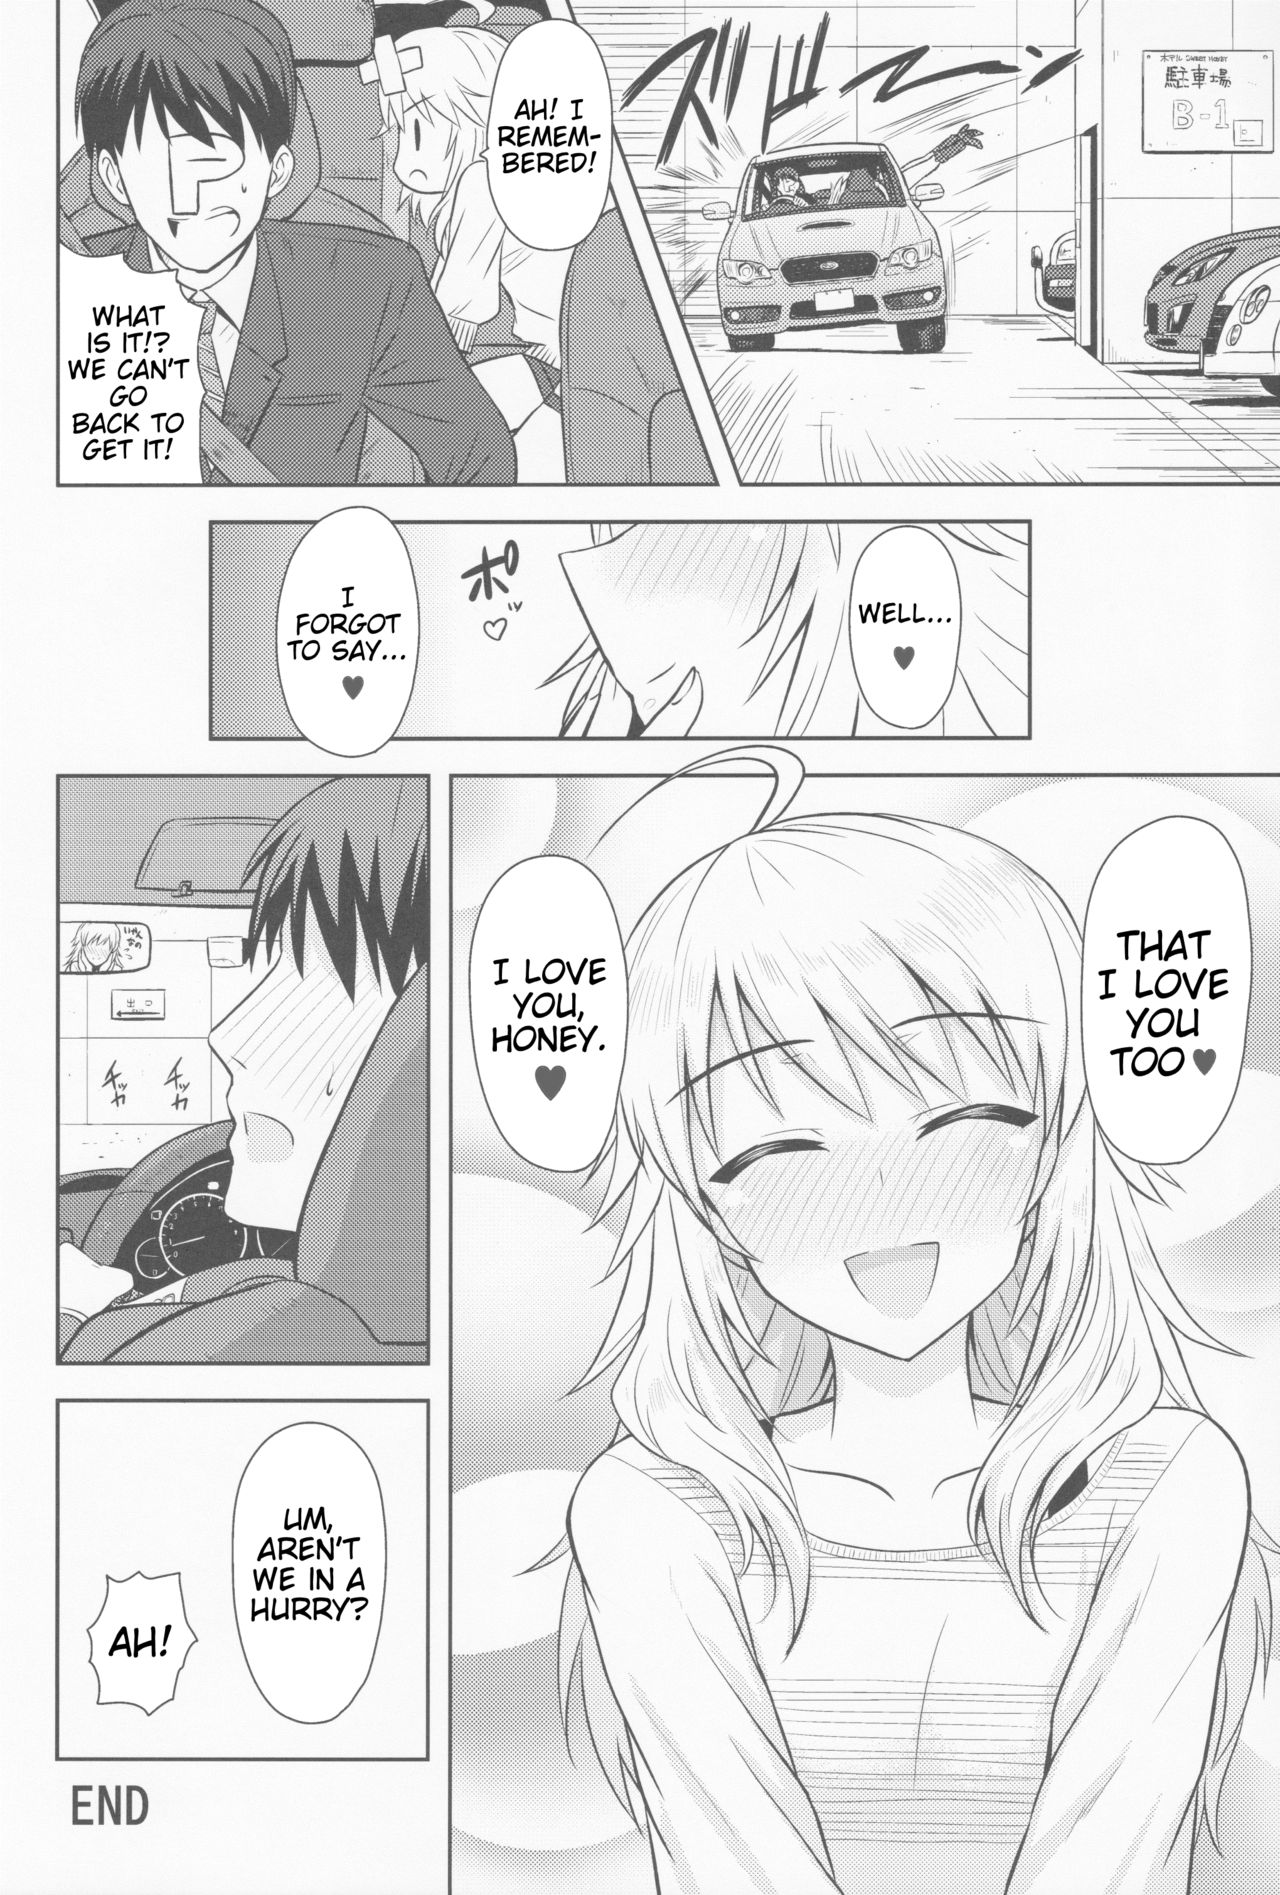 (MarionetteAngel2013) [PLANT (Tsurui)] Oshiete MY HONEY (THE IDOLM@STER) [English] {doujin-moe.us} page 44 full